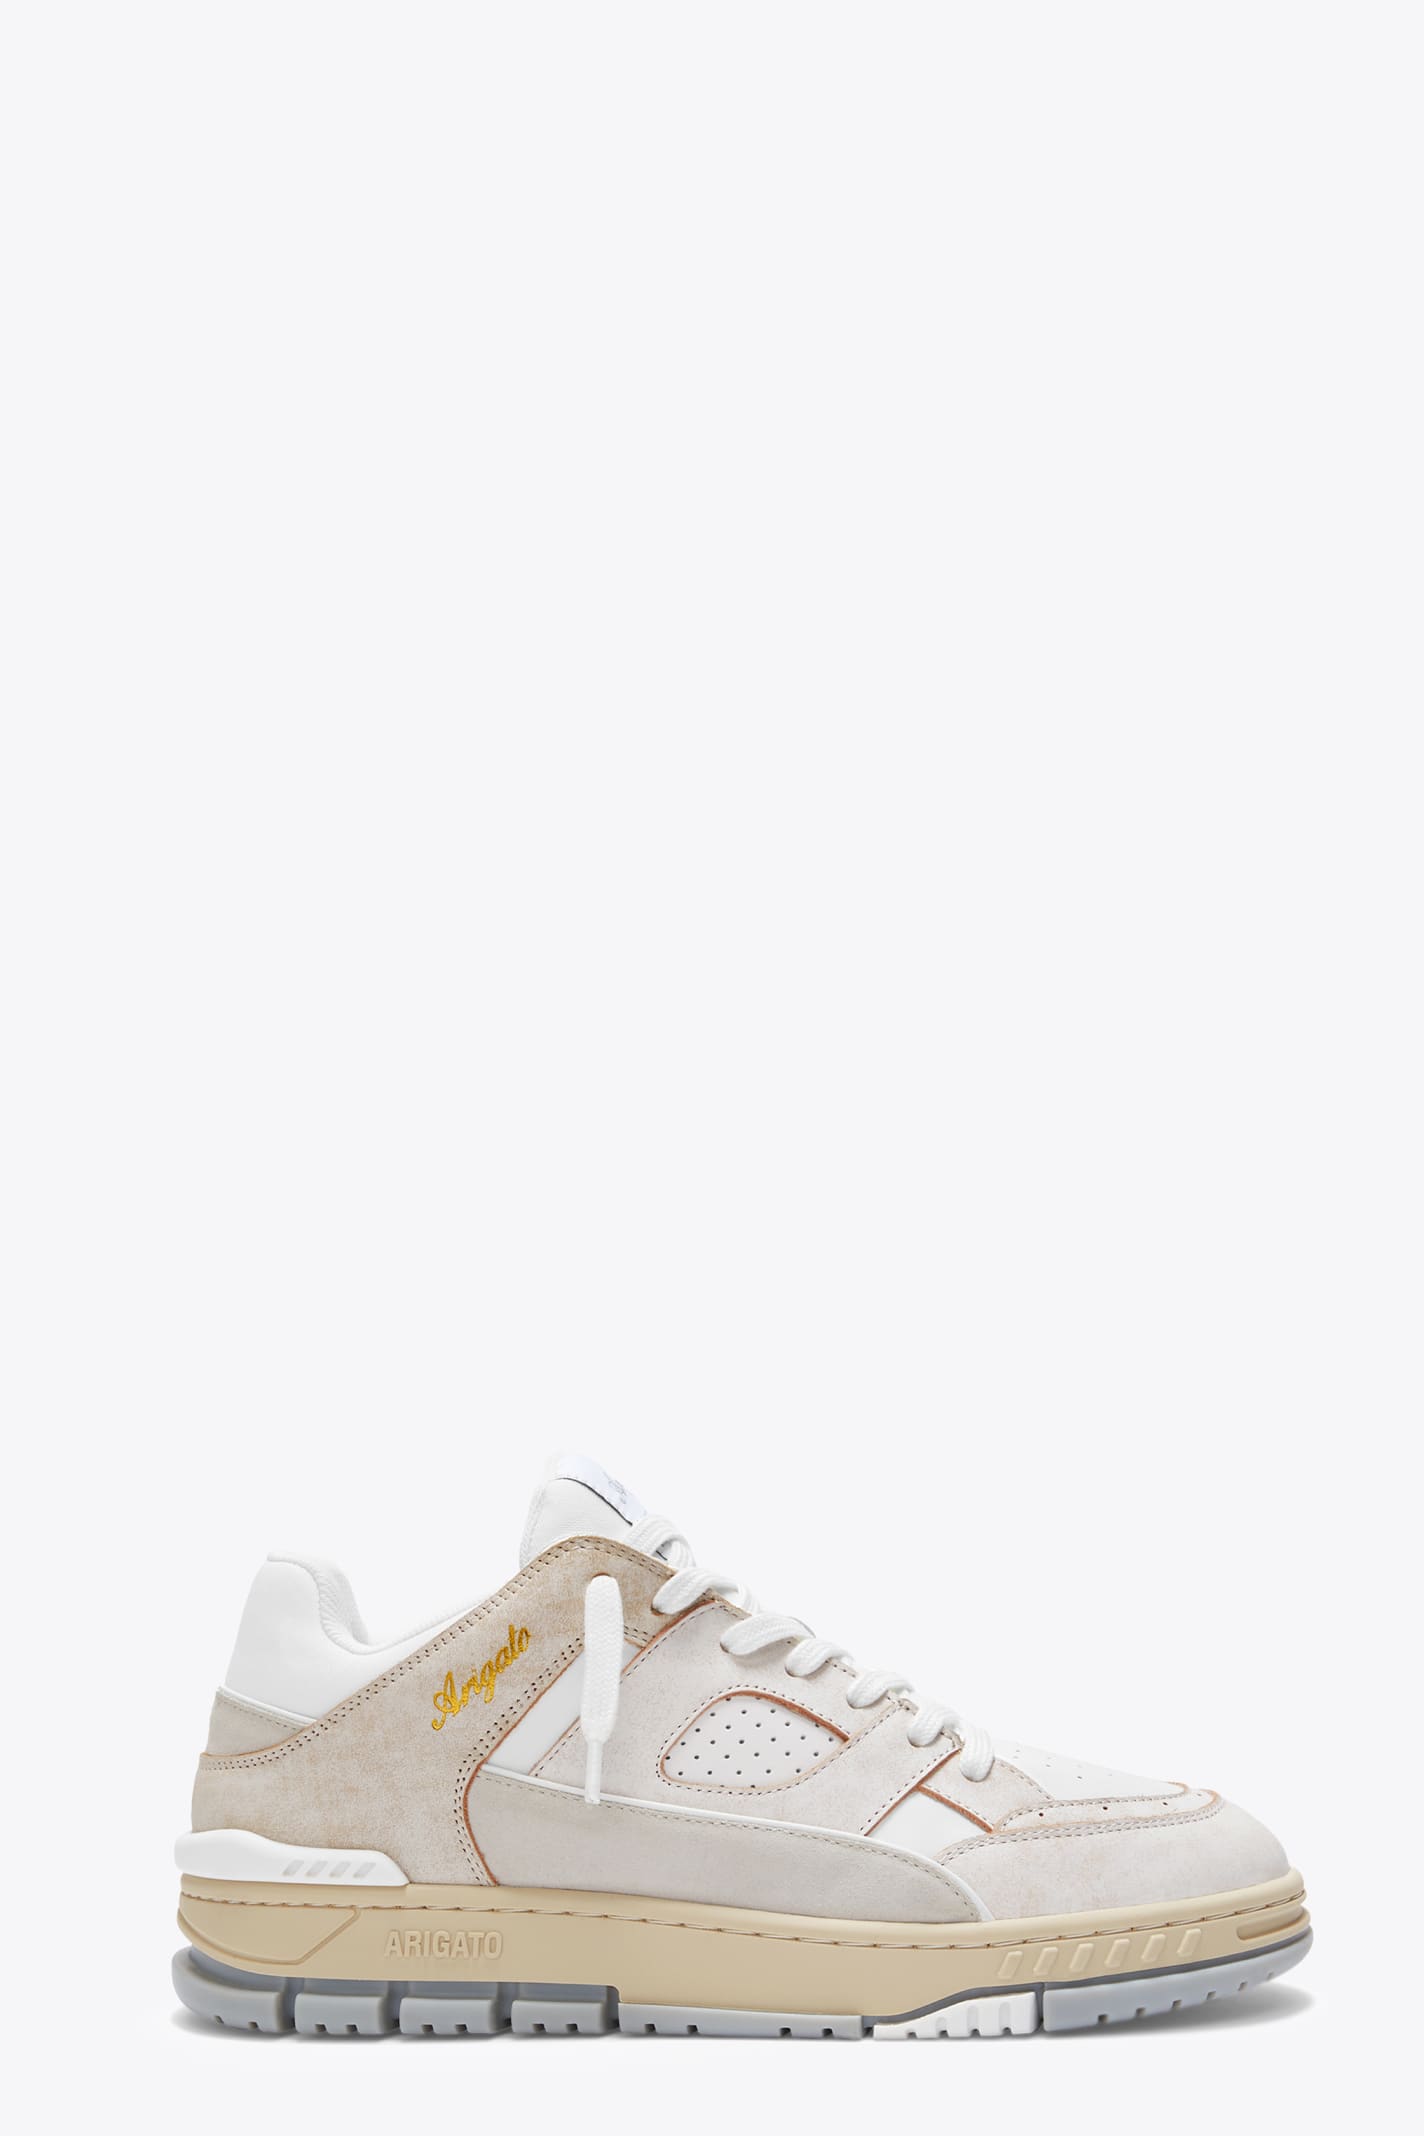 Area Lo Sneaker White and cream leather lace-up low sneaker - Area Lo sneaker